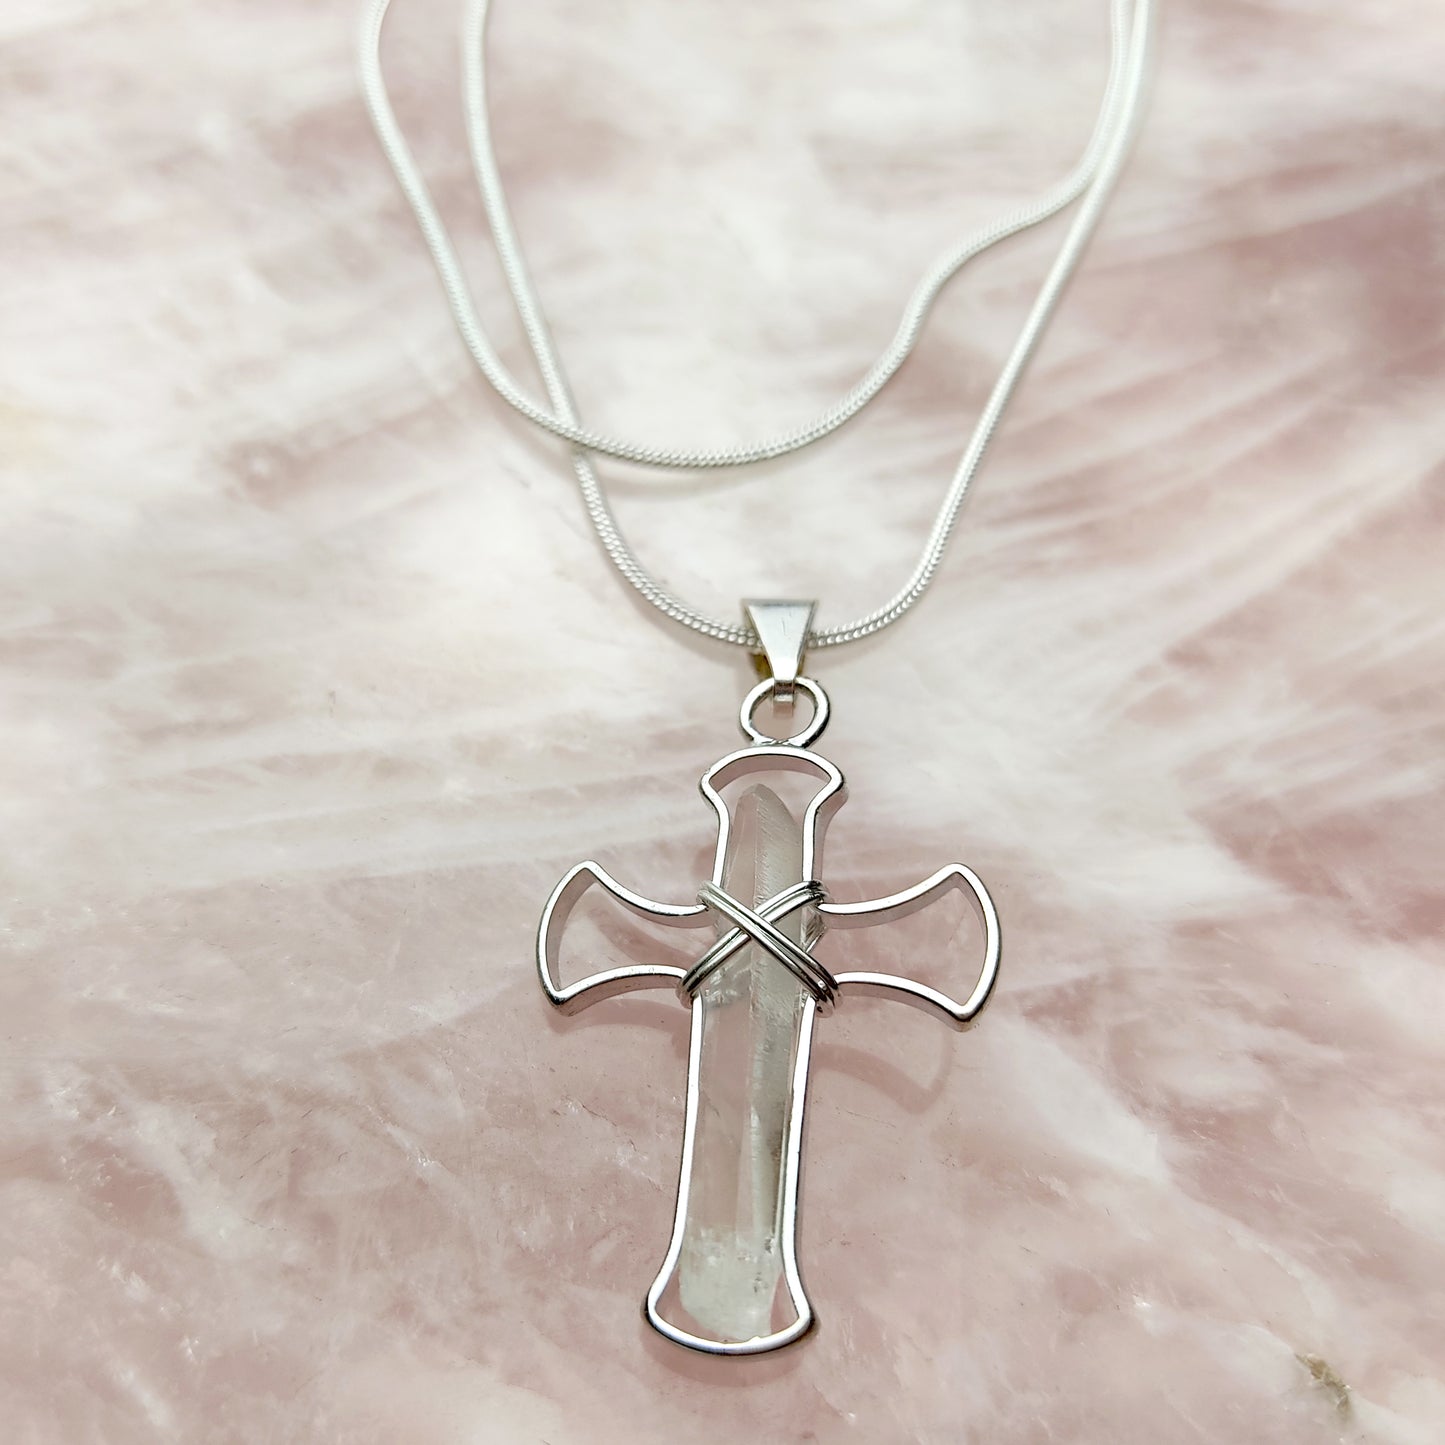 Clear Quartz Cross Pendant Wrap With 20" Silver Plated Snake Necklace Chain Gift